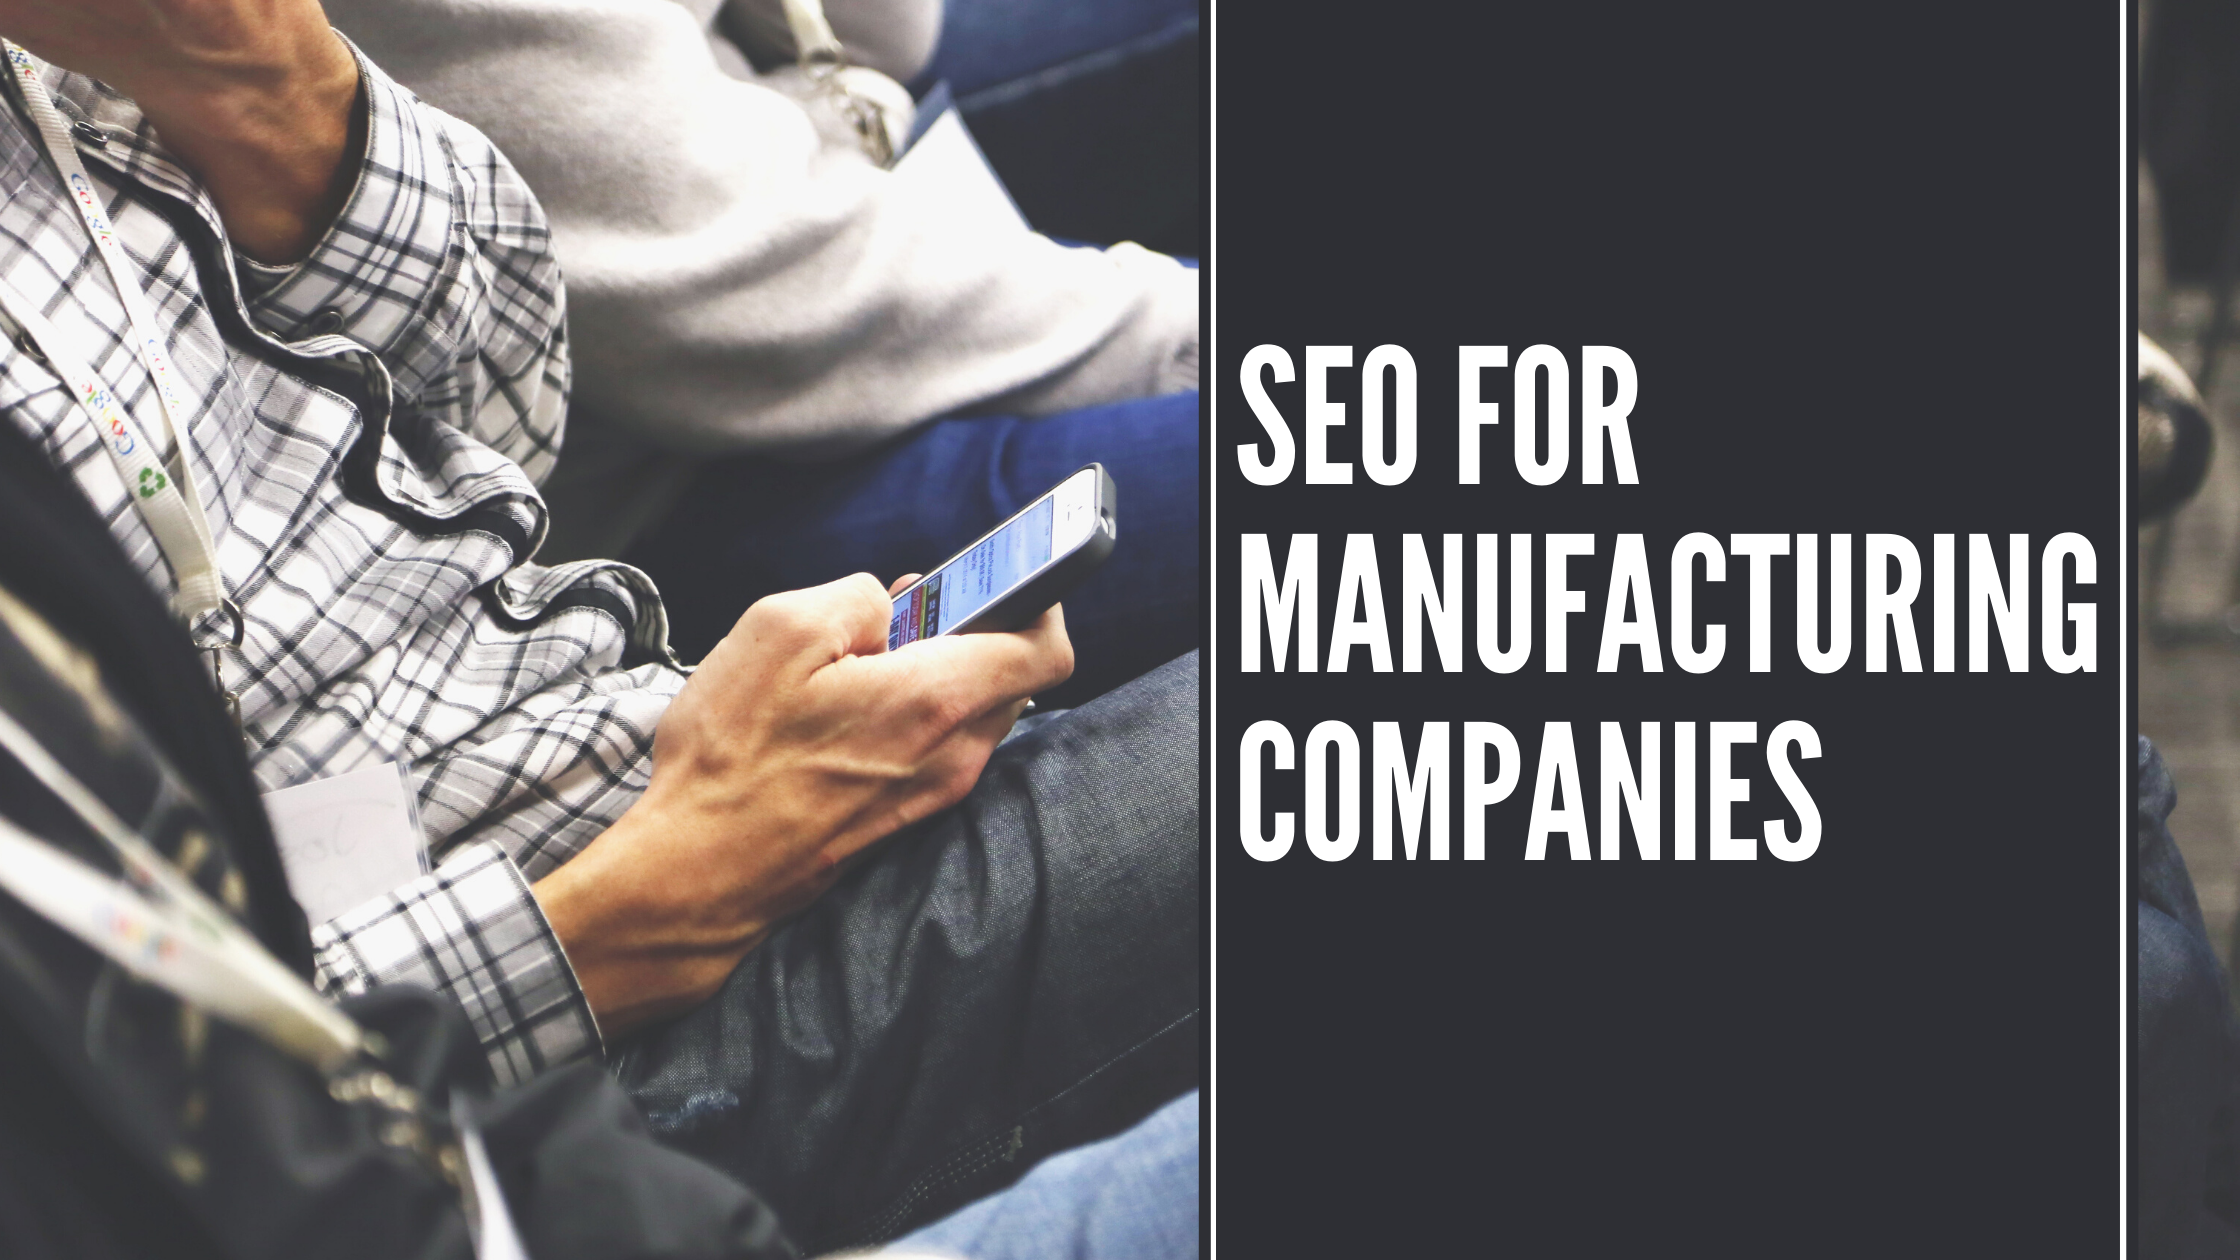 SEO for Manufacturing Companies is a Strategic Issue